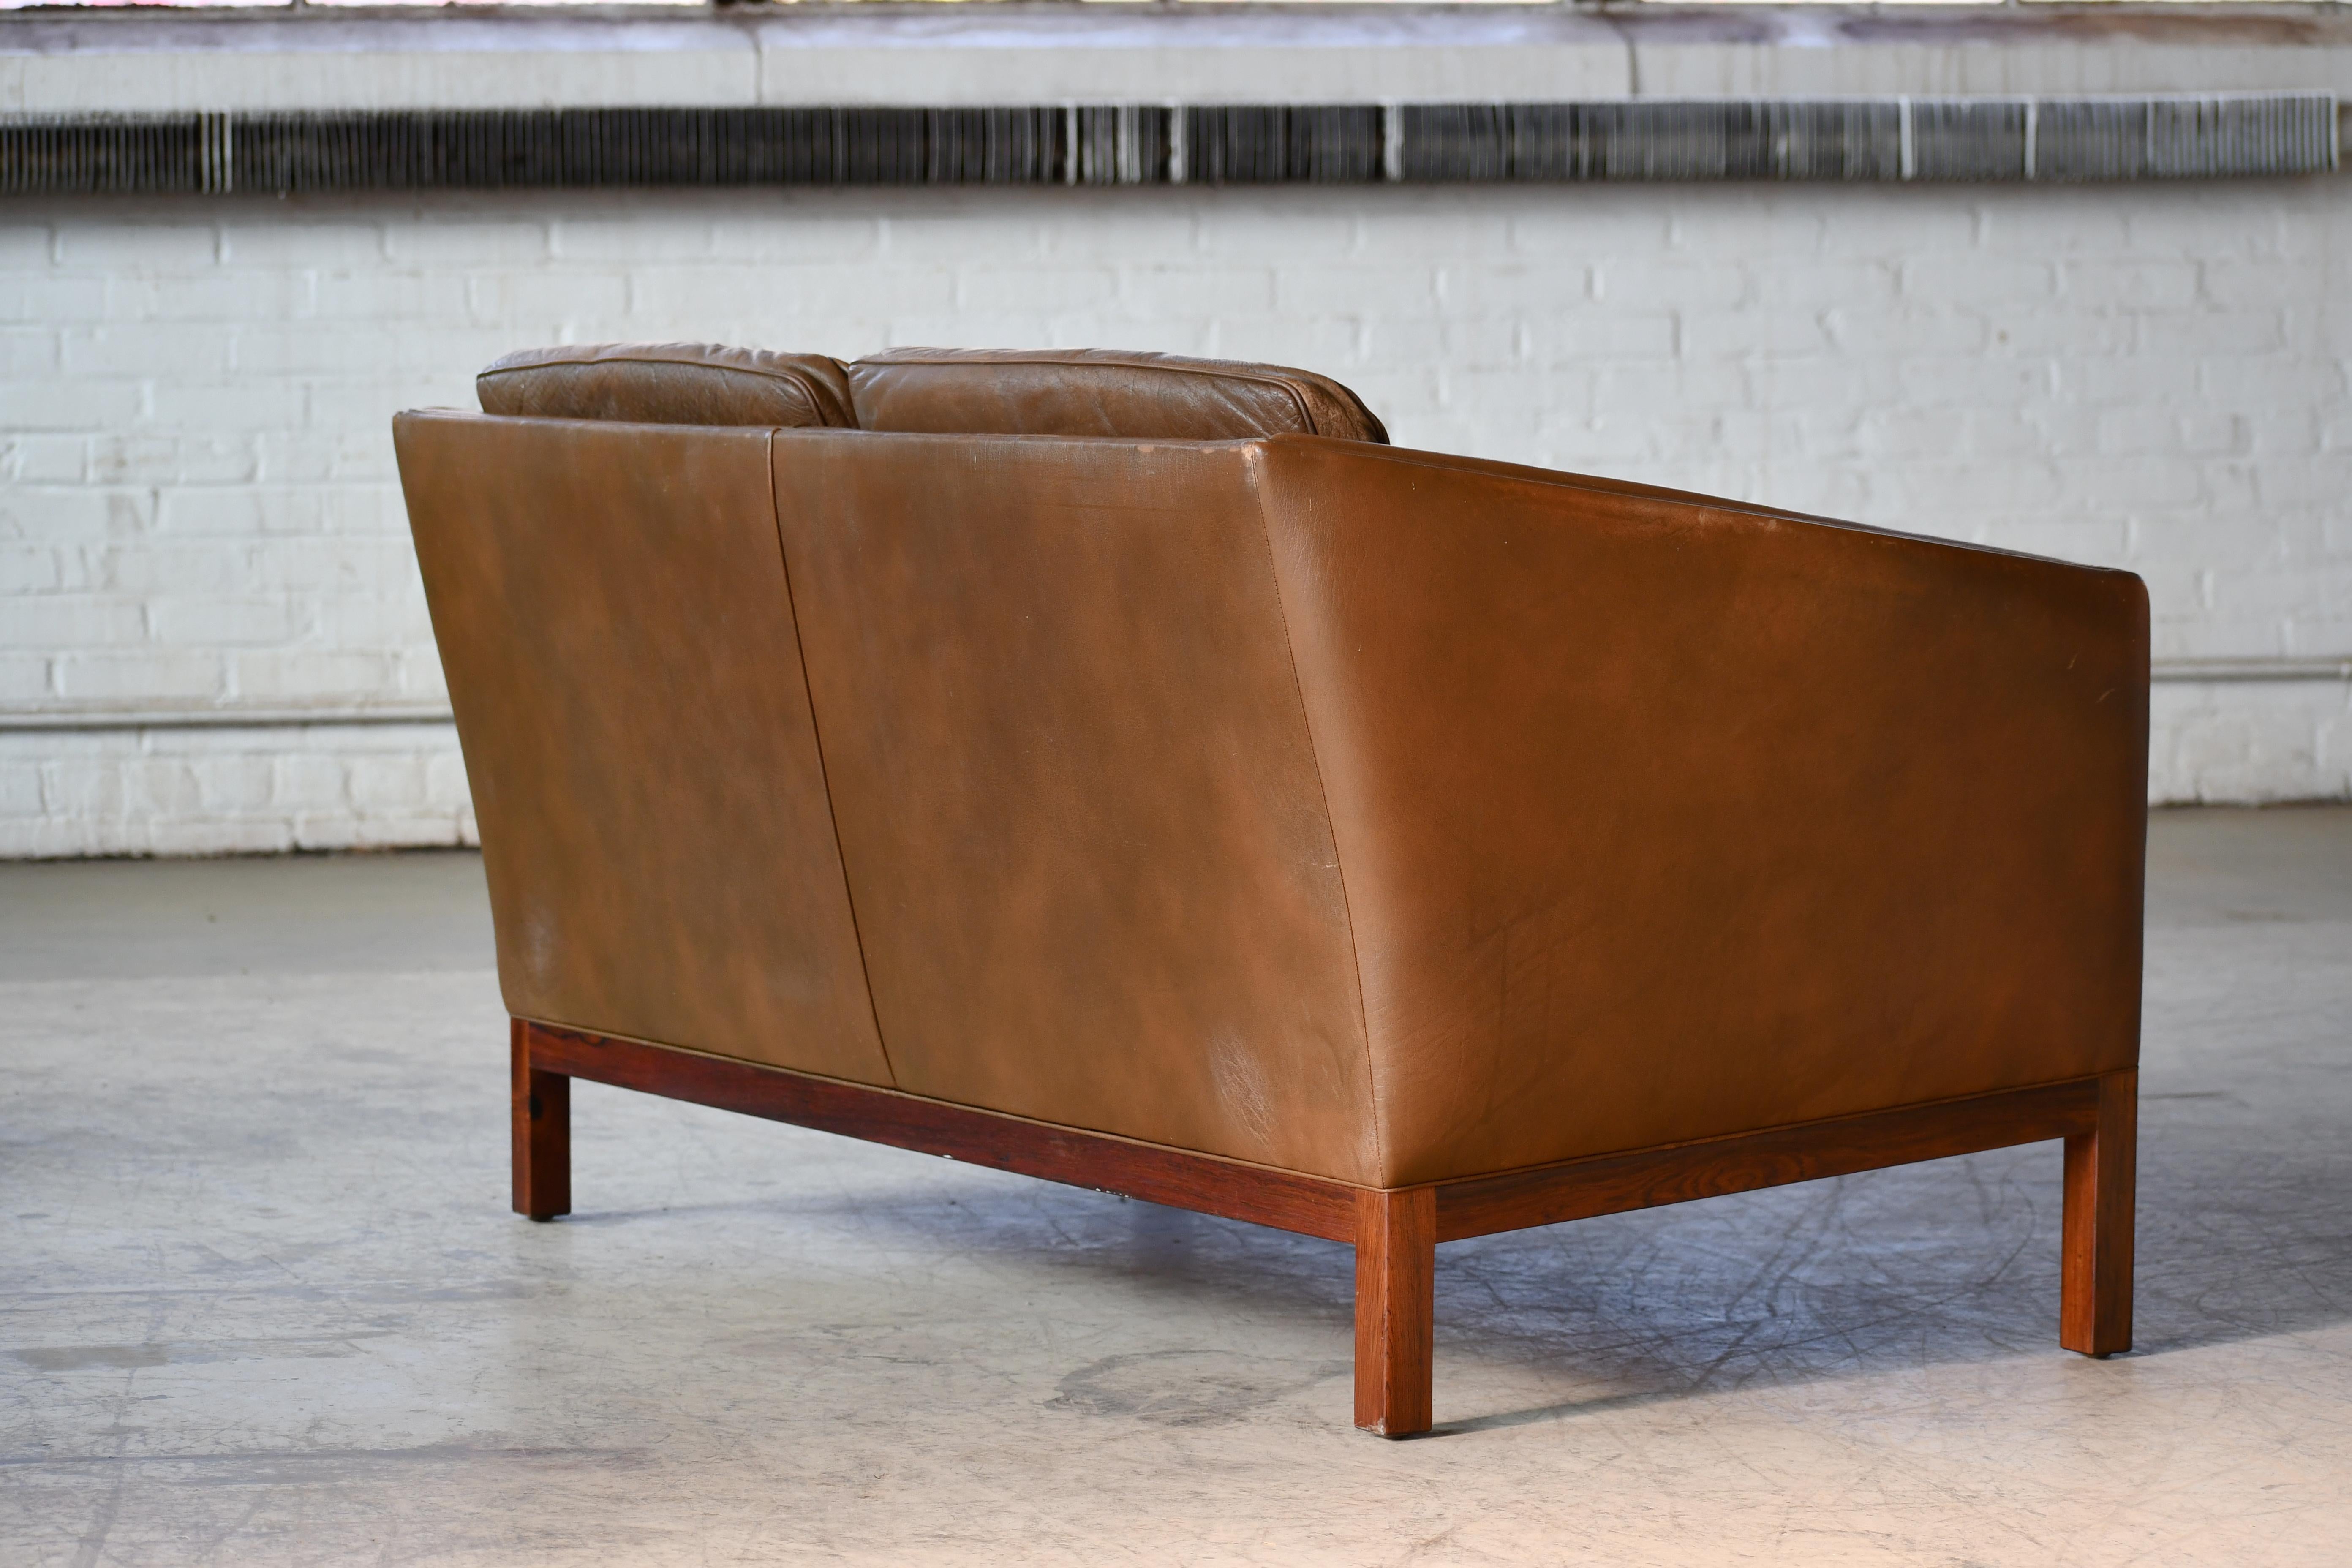 Loveseat by Illum Wikkelso in Cognac Leather and Rosewood Denmark 1960's For Sale 4